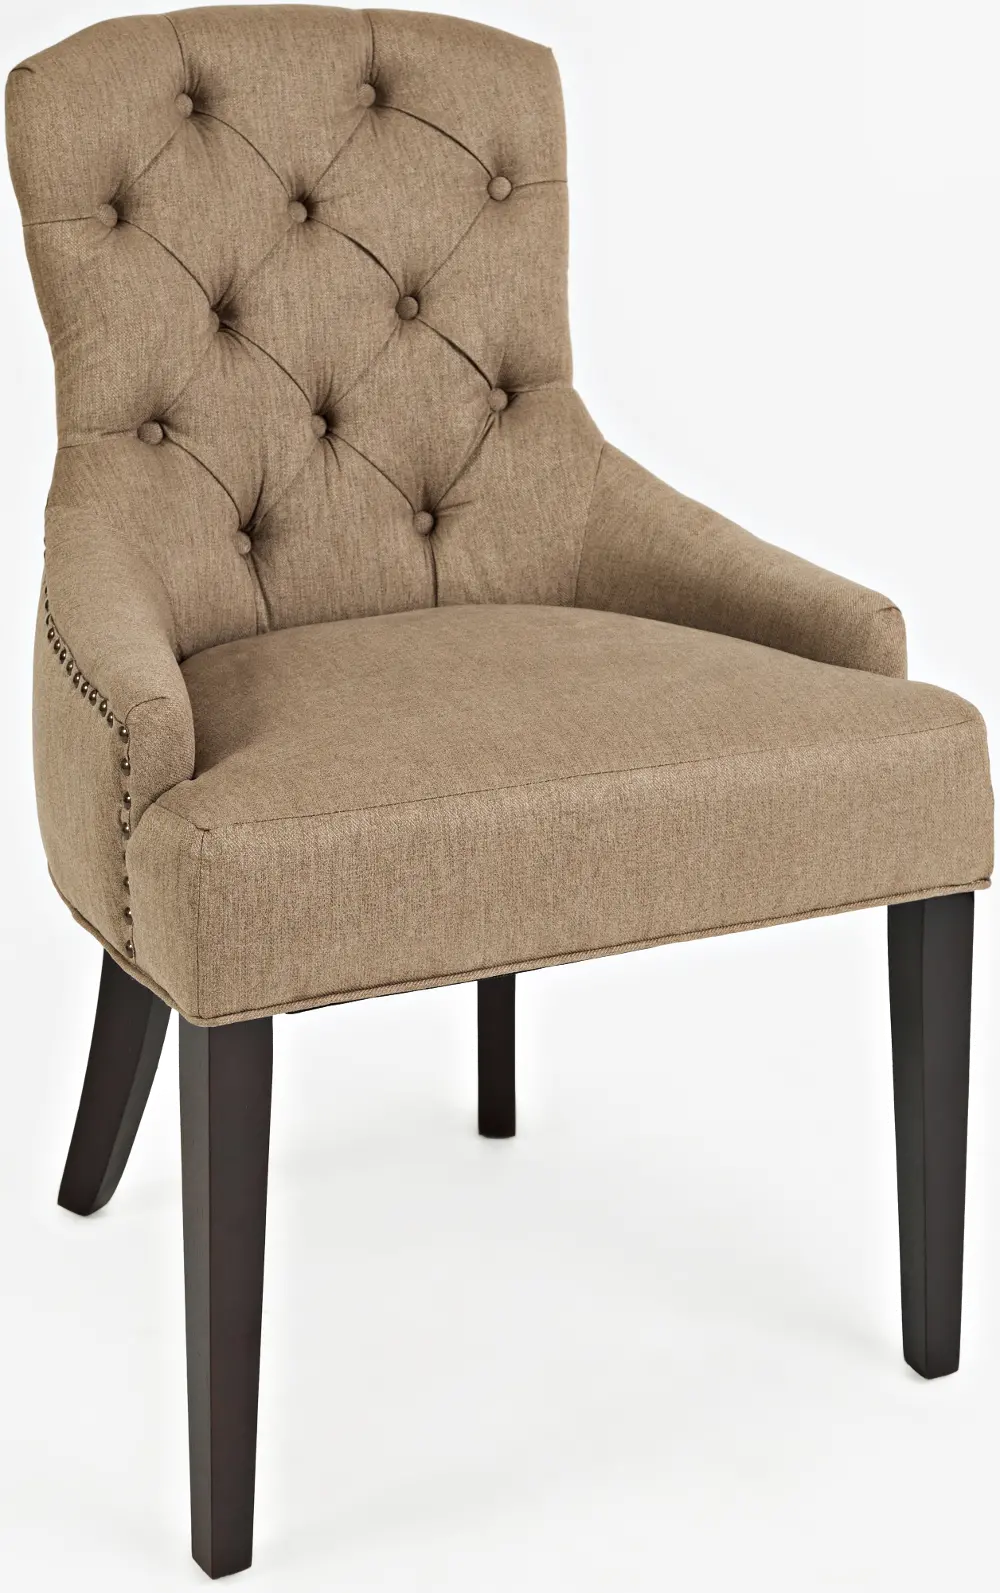 Chestnut Button-Tufted Upholstered Dining Chair - Gramercy-1